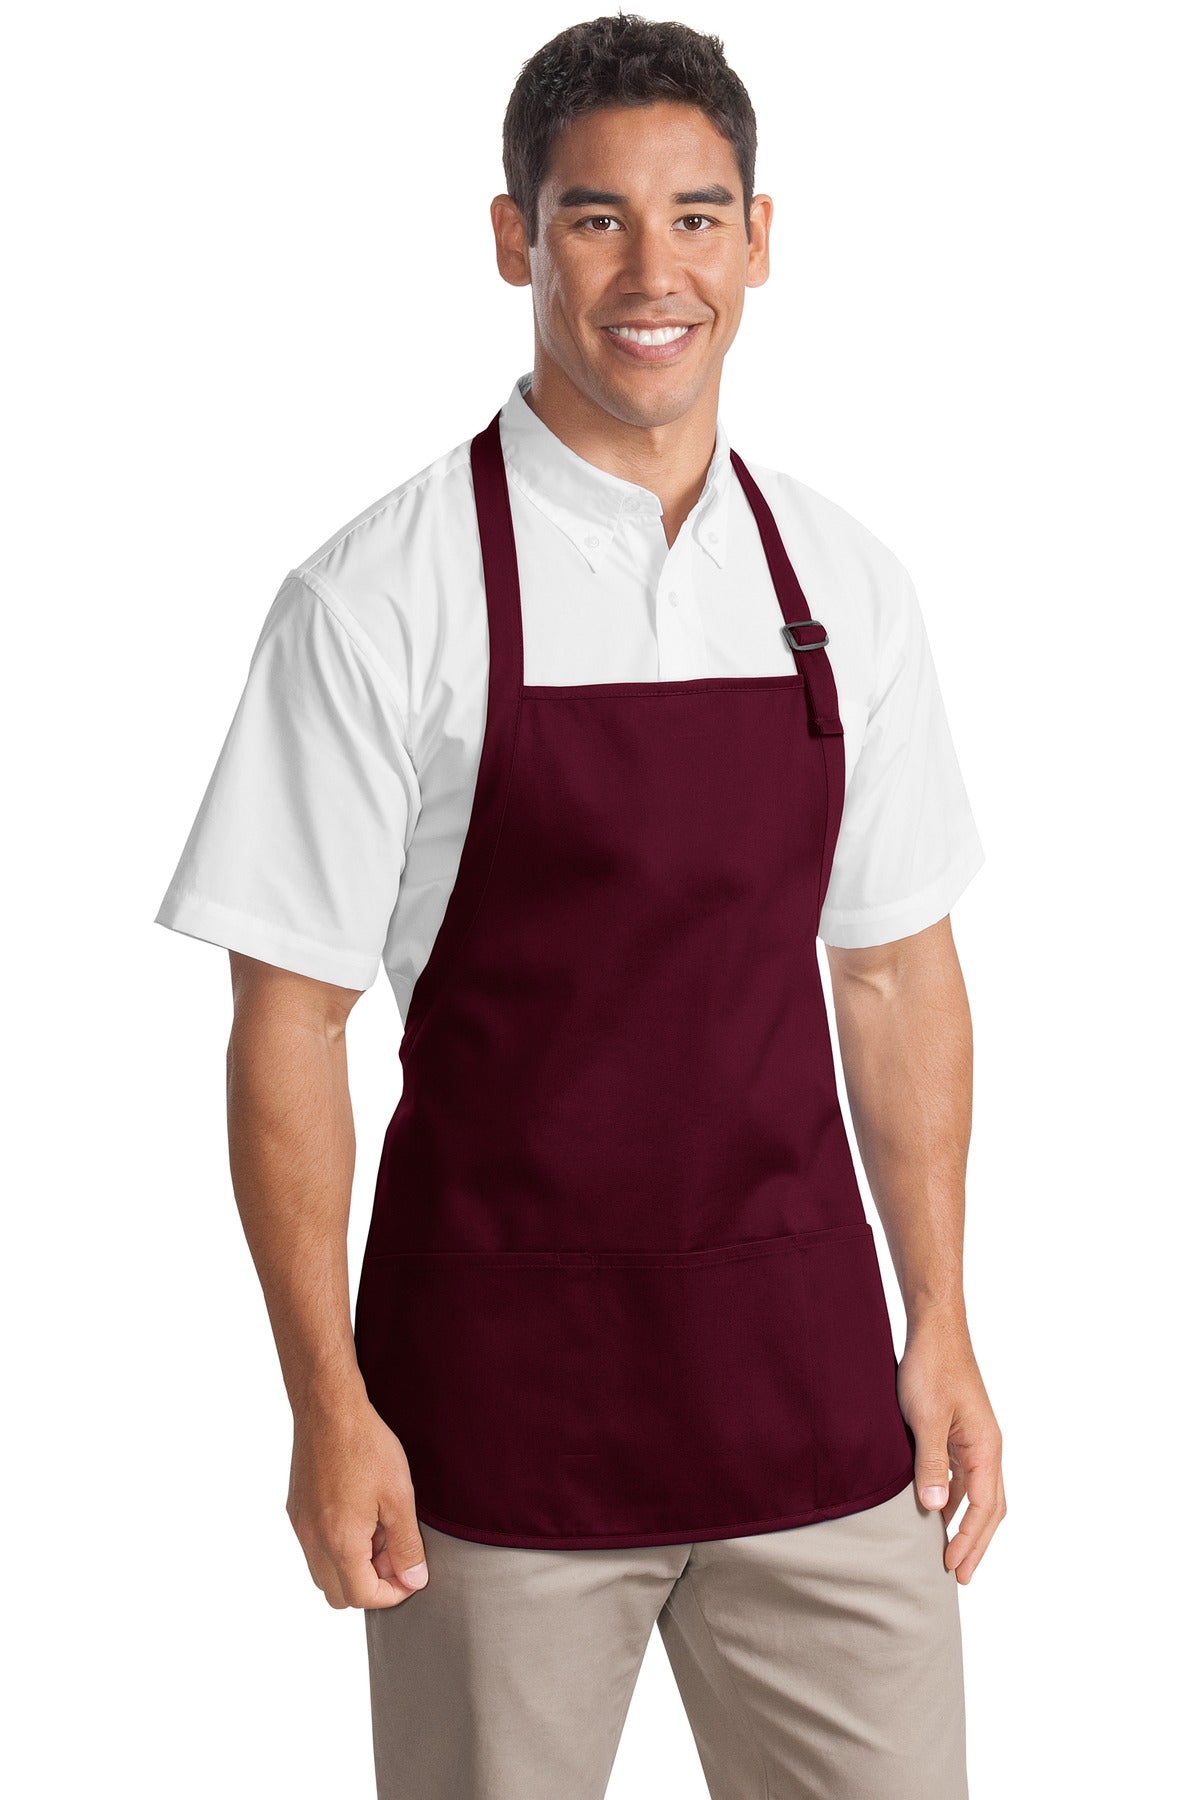 Port Authority® Medium-Length Apron with Pouch Pockets.  A510